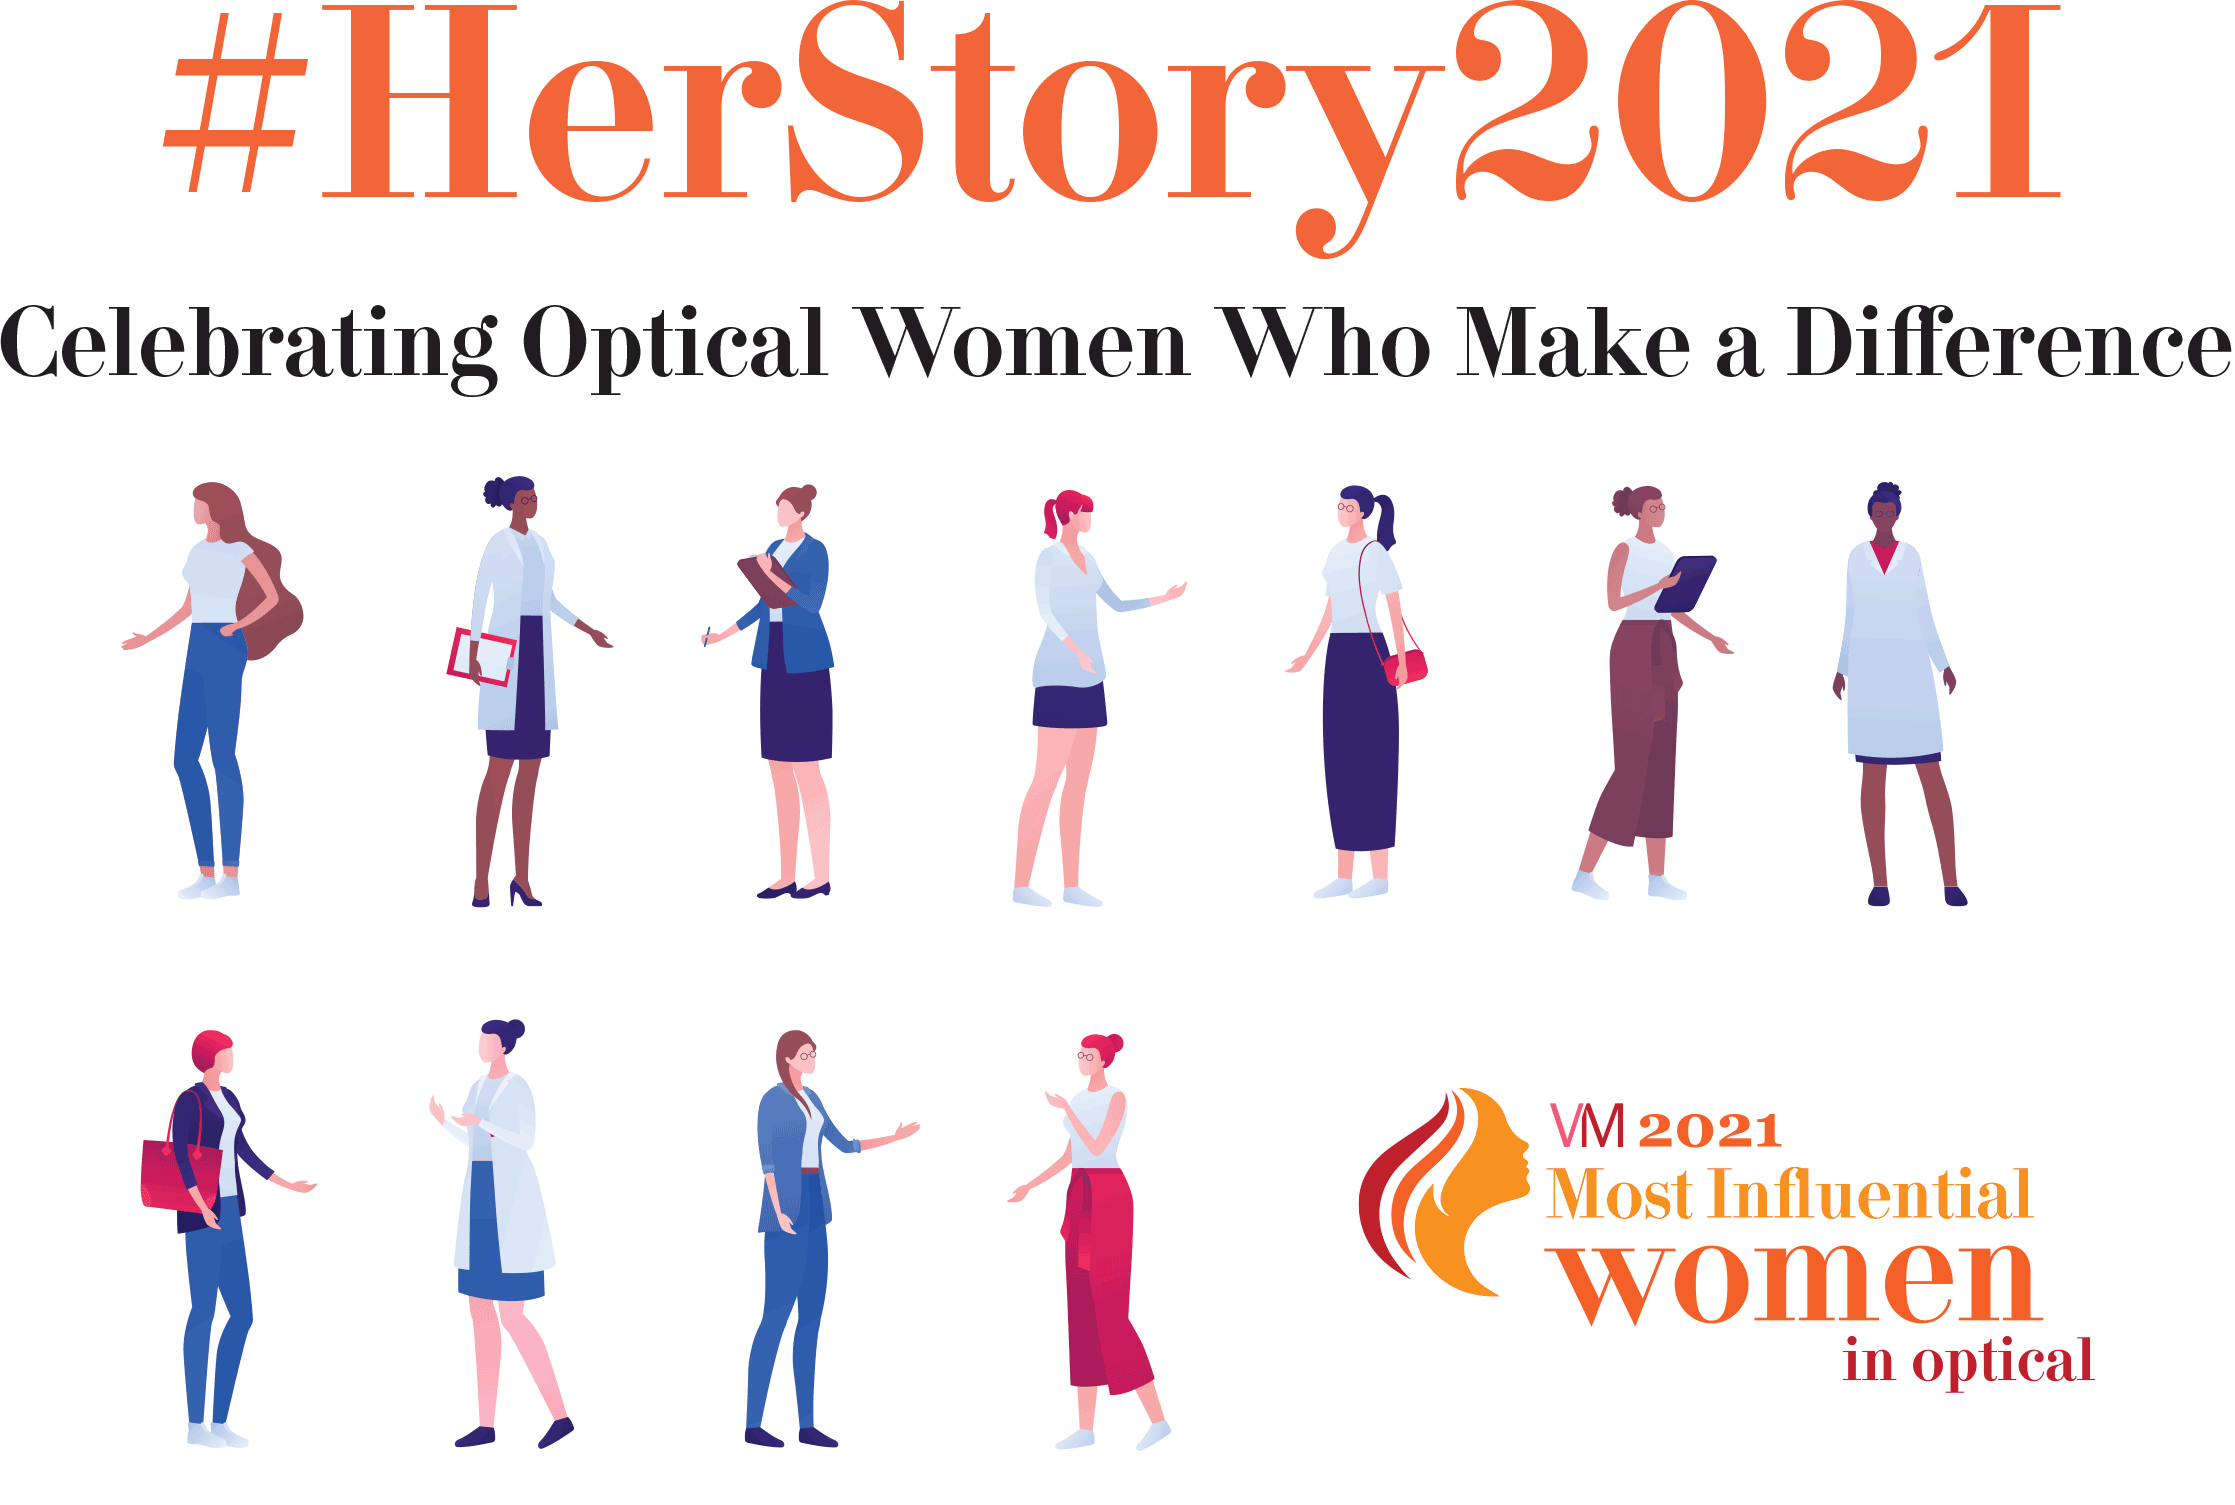 Vision Monday 2021 - #HerStory2021